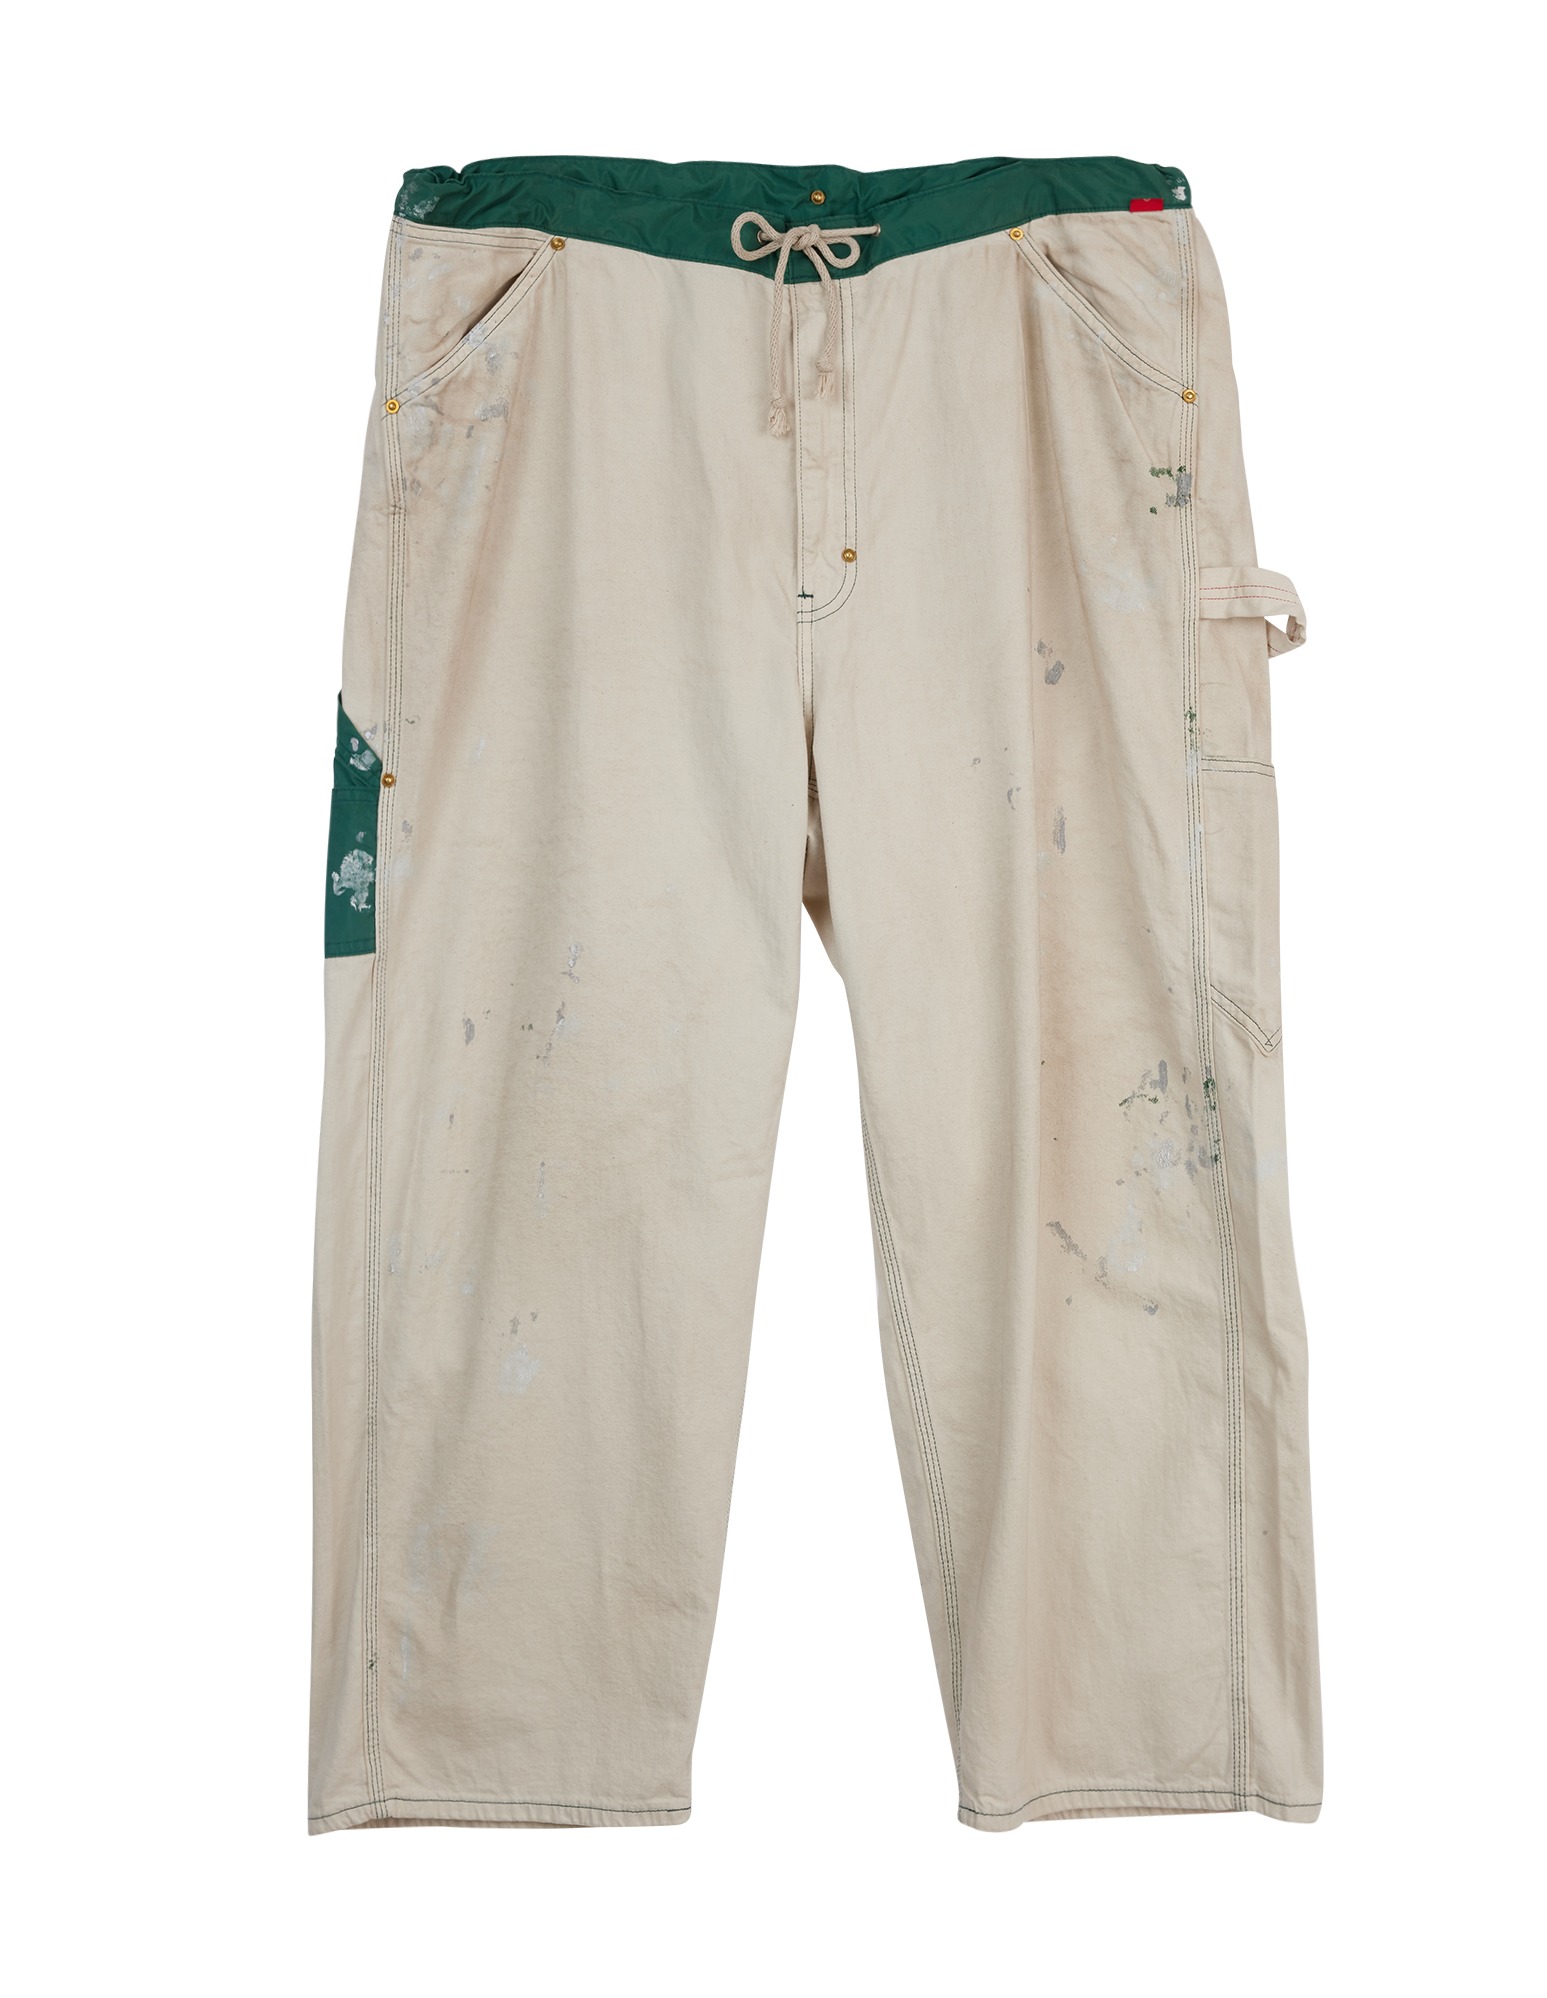 AN297-W Dart Paint Painter Easy Pants (Off white X Green)